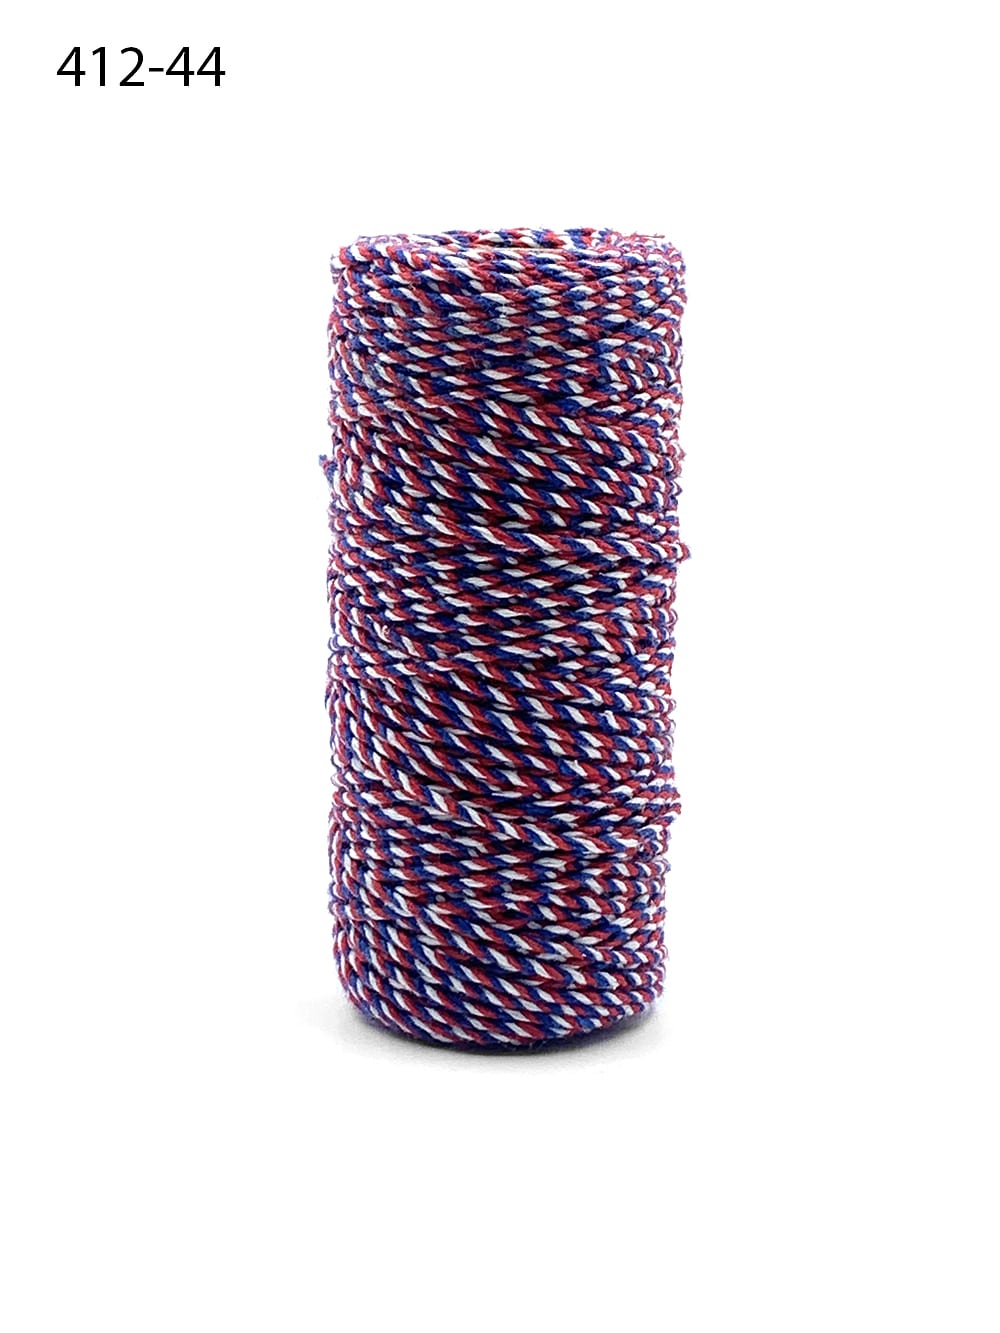 Airmail Striped Baker's Twine - 4-ply thin cotton twine